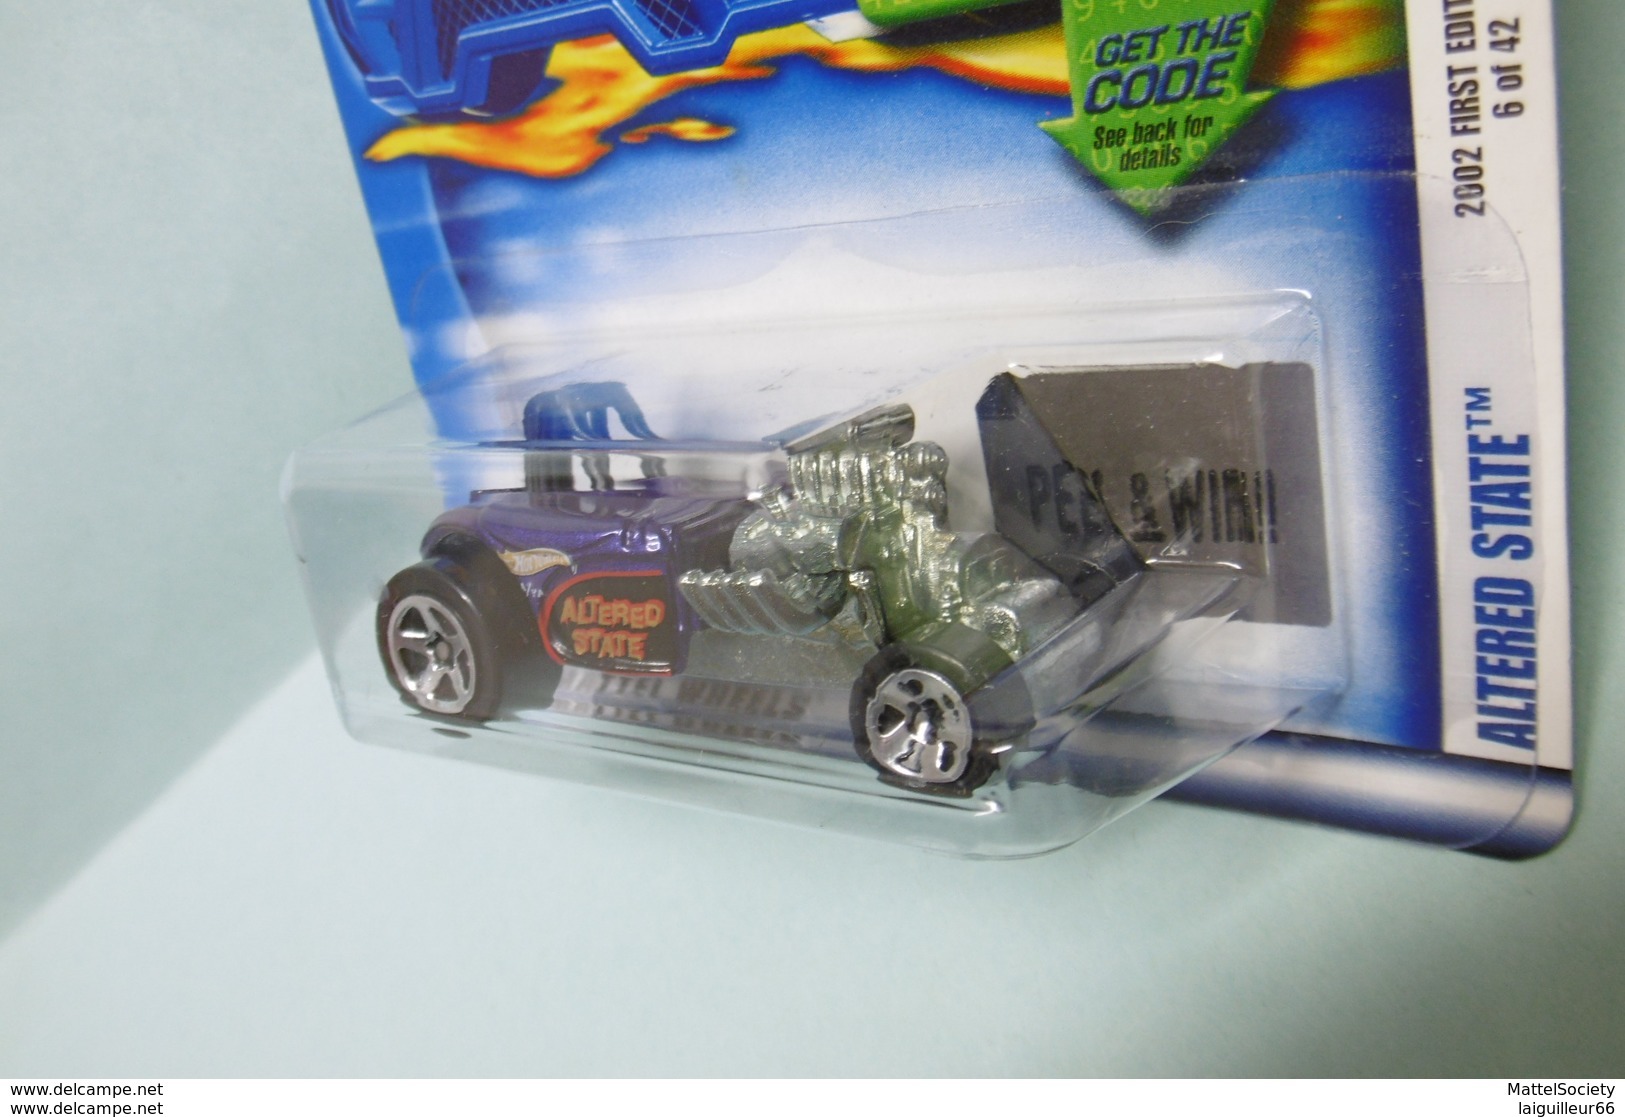 Hot Wheels - ALTERED STATE Dragster - 2002 First Editions - Collector 18 - Race & Win HOTWHEELS US Long Card 1/64 - HotWheels